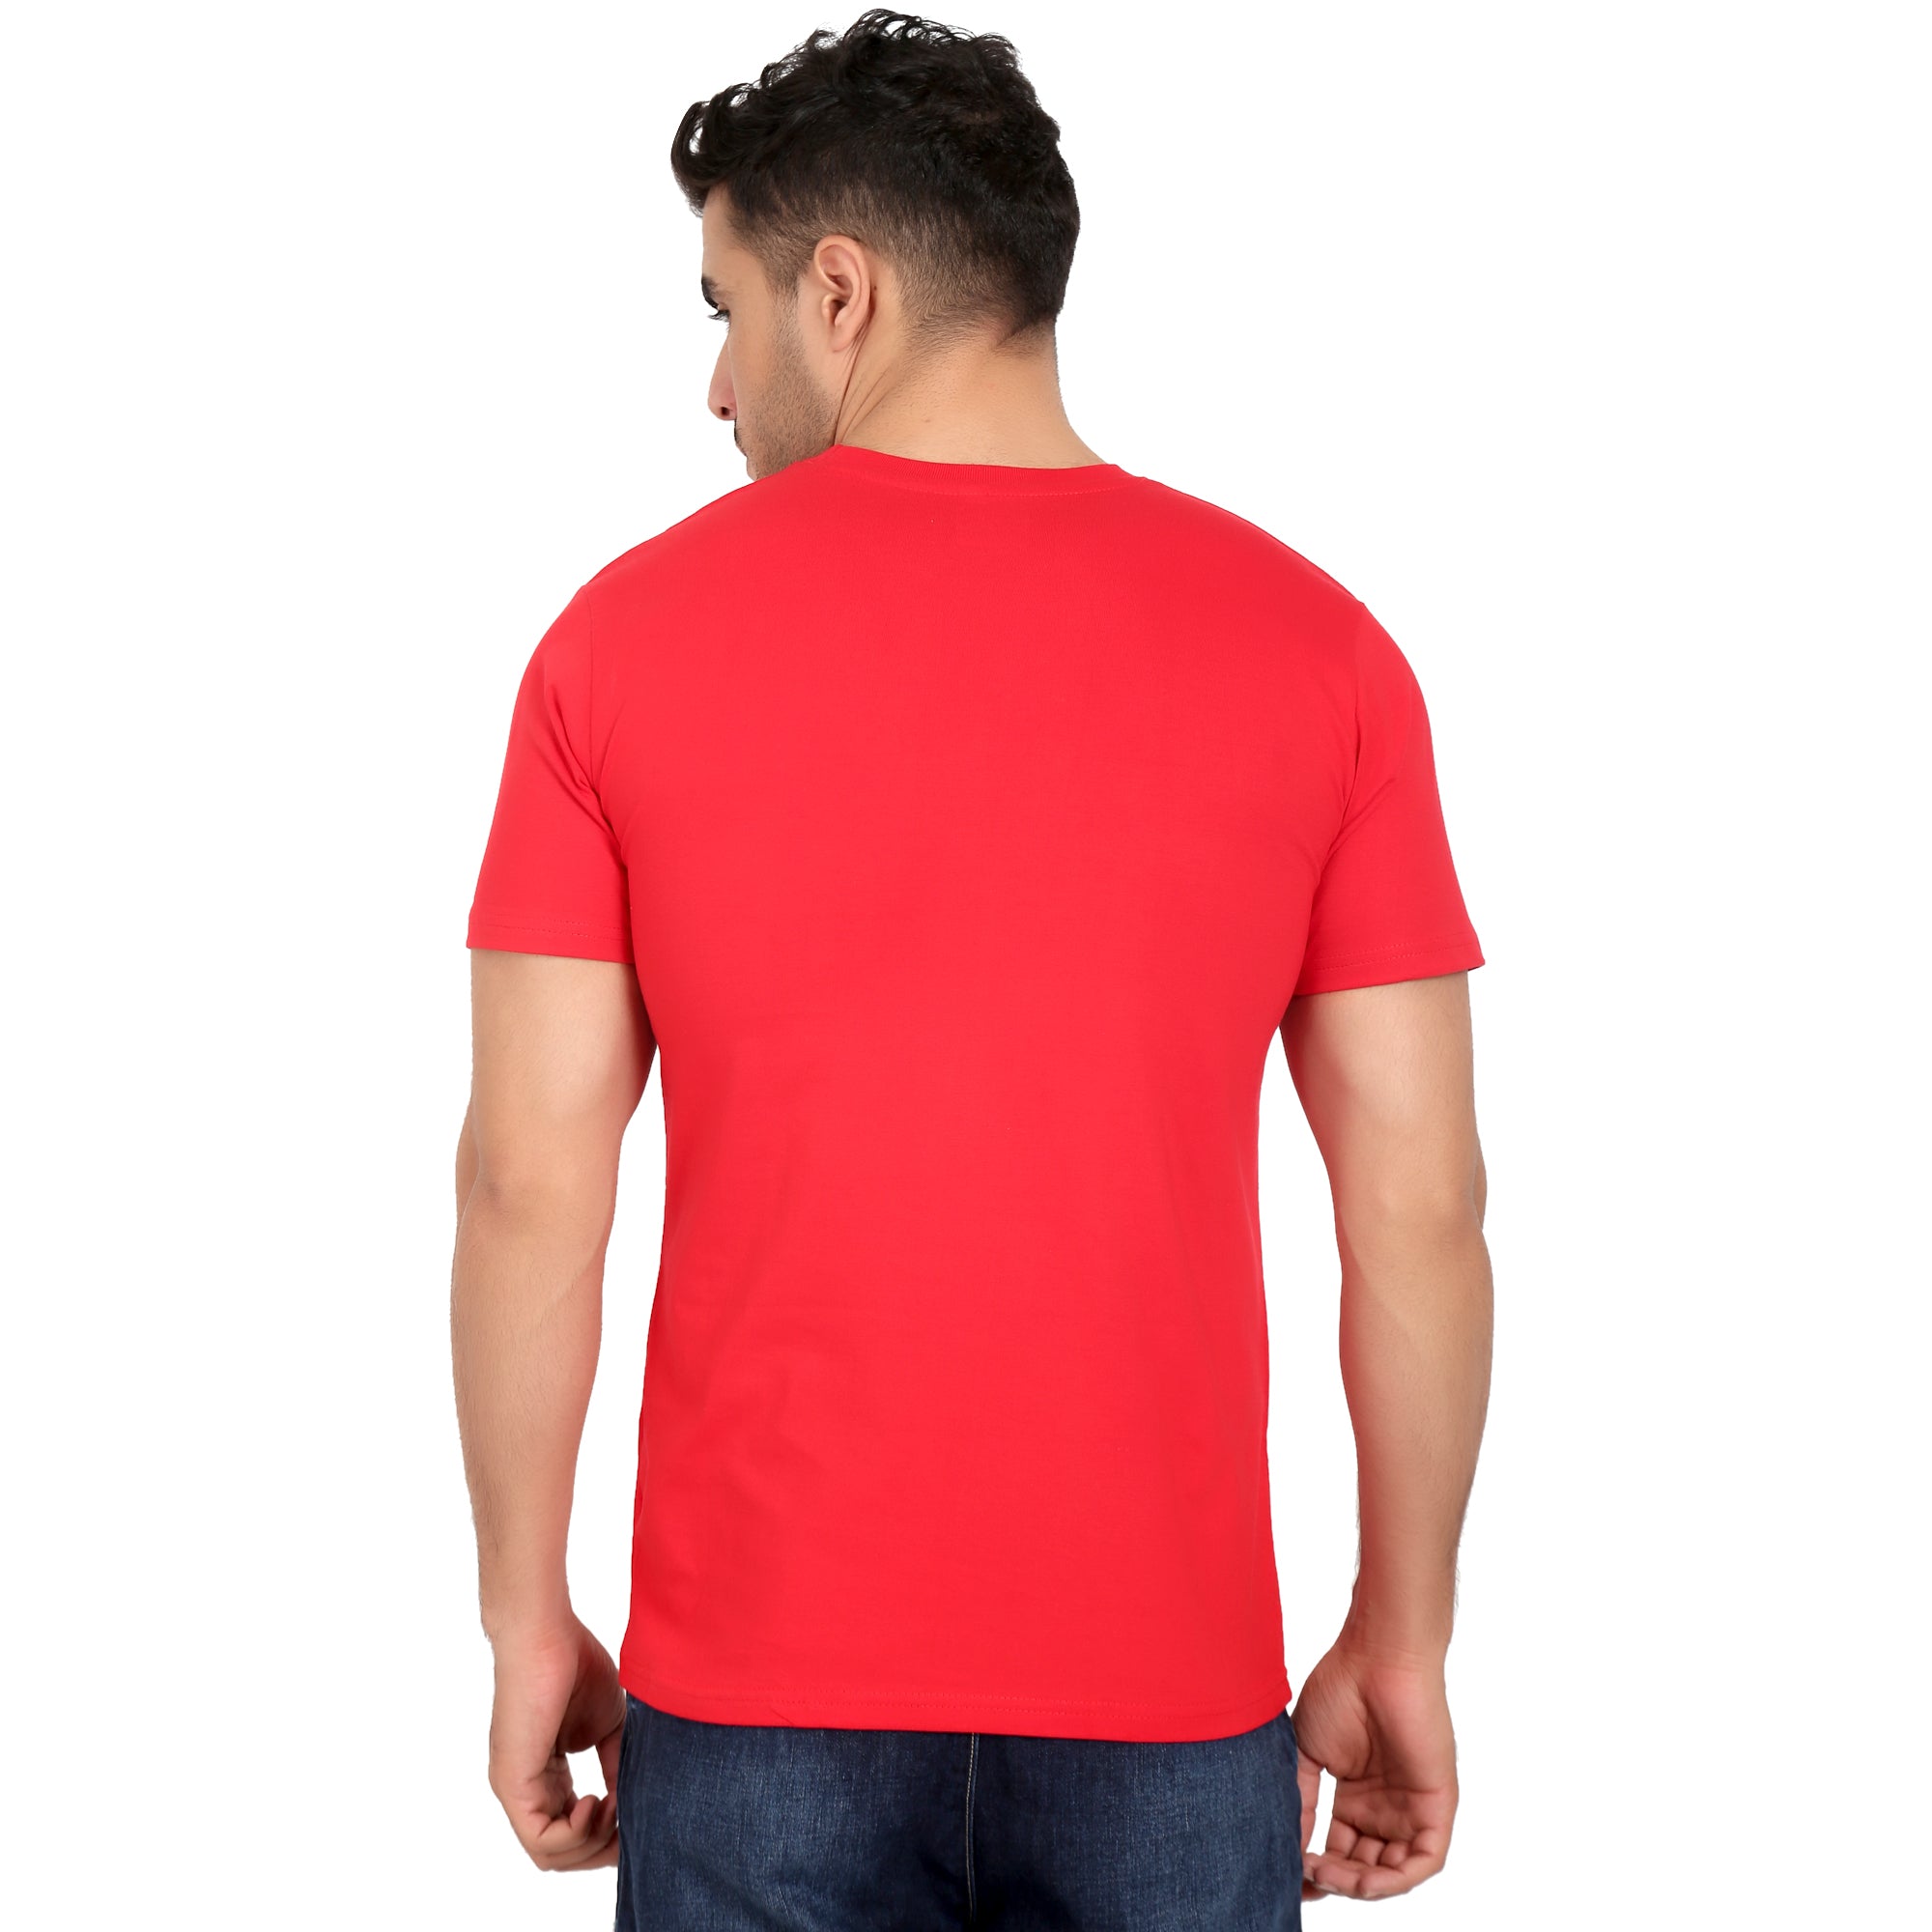 Combo Offer - Men Crew Neck Cotton T-Shirts - Half Sleeves - 3 Colors - Red, Blue & White